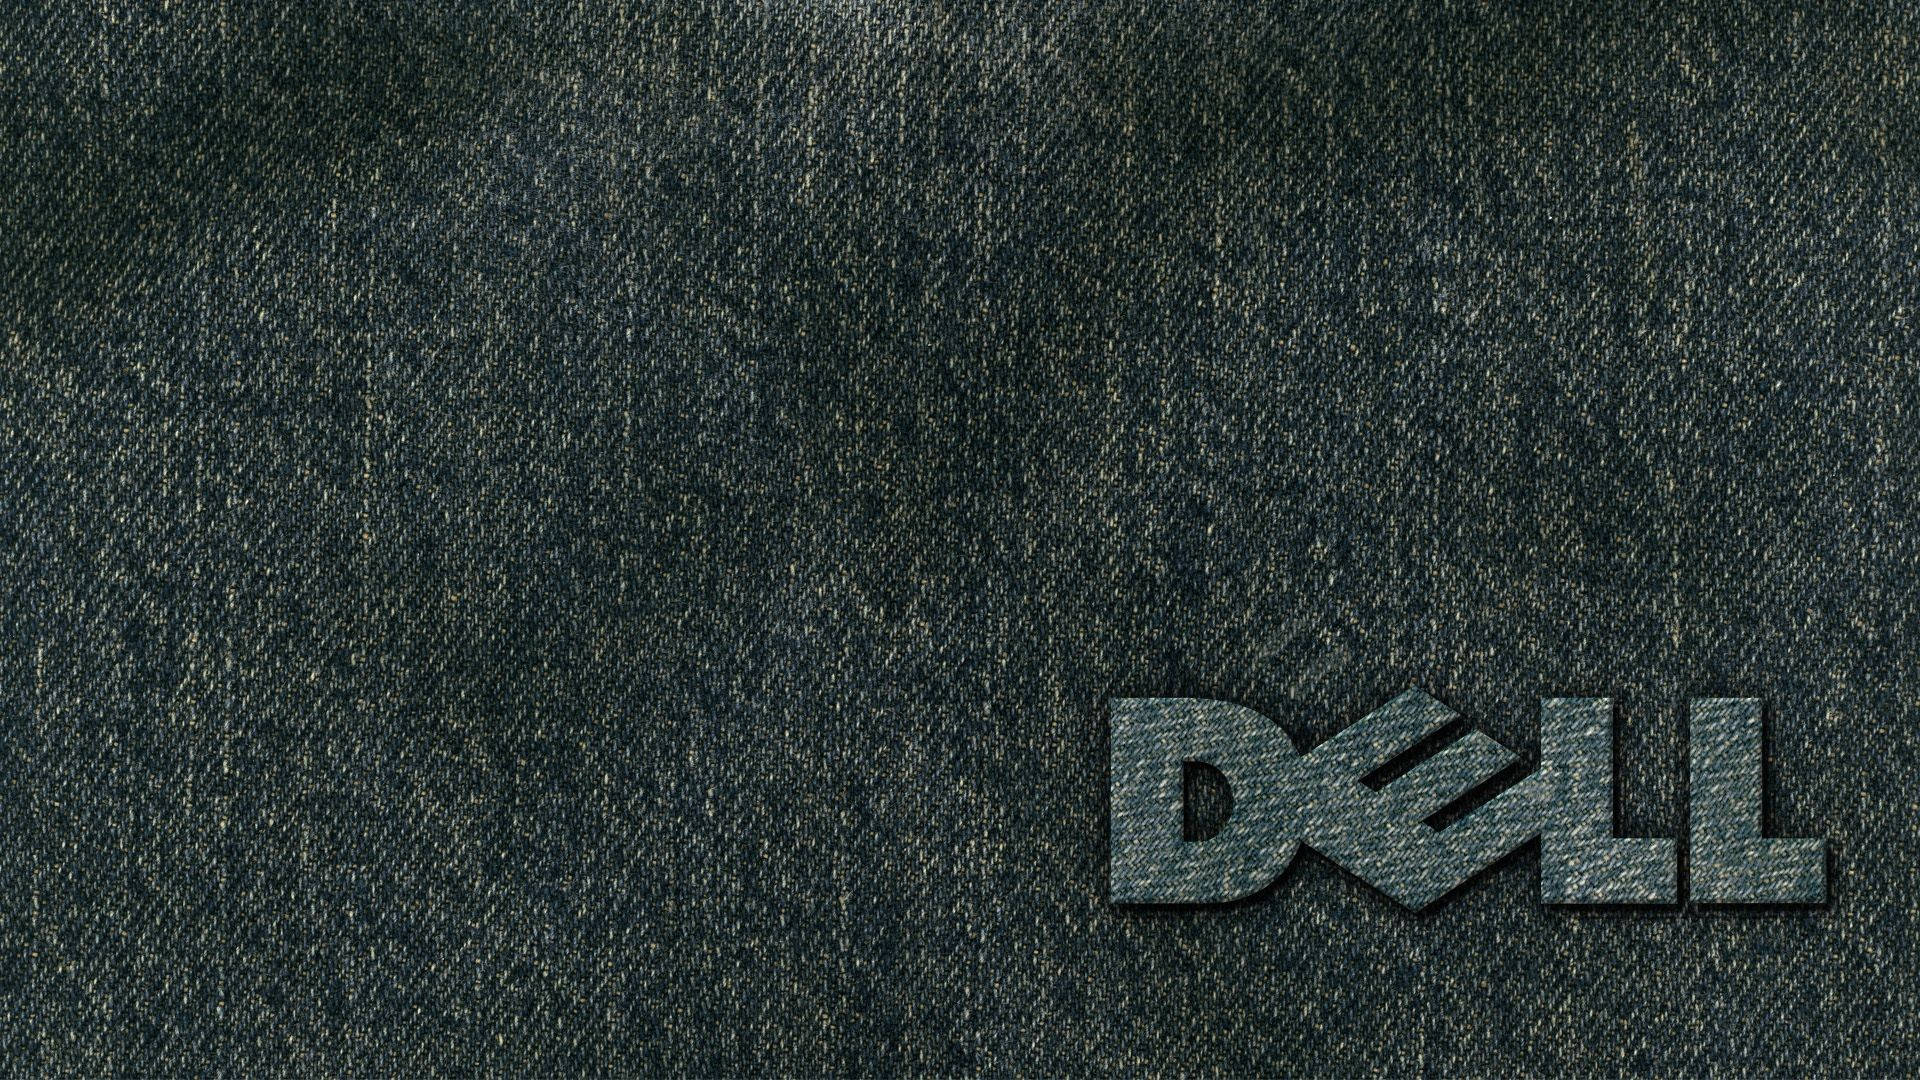 1920X1080 Dell Wallpaper and Background